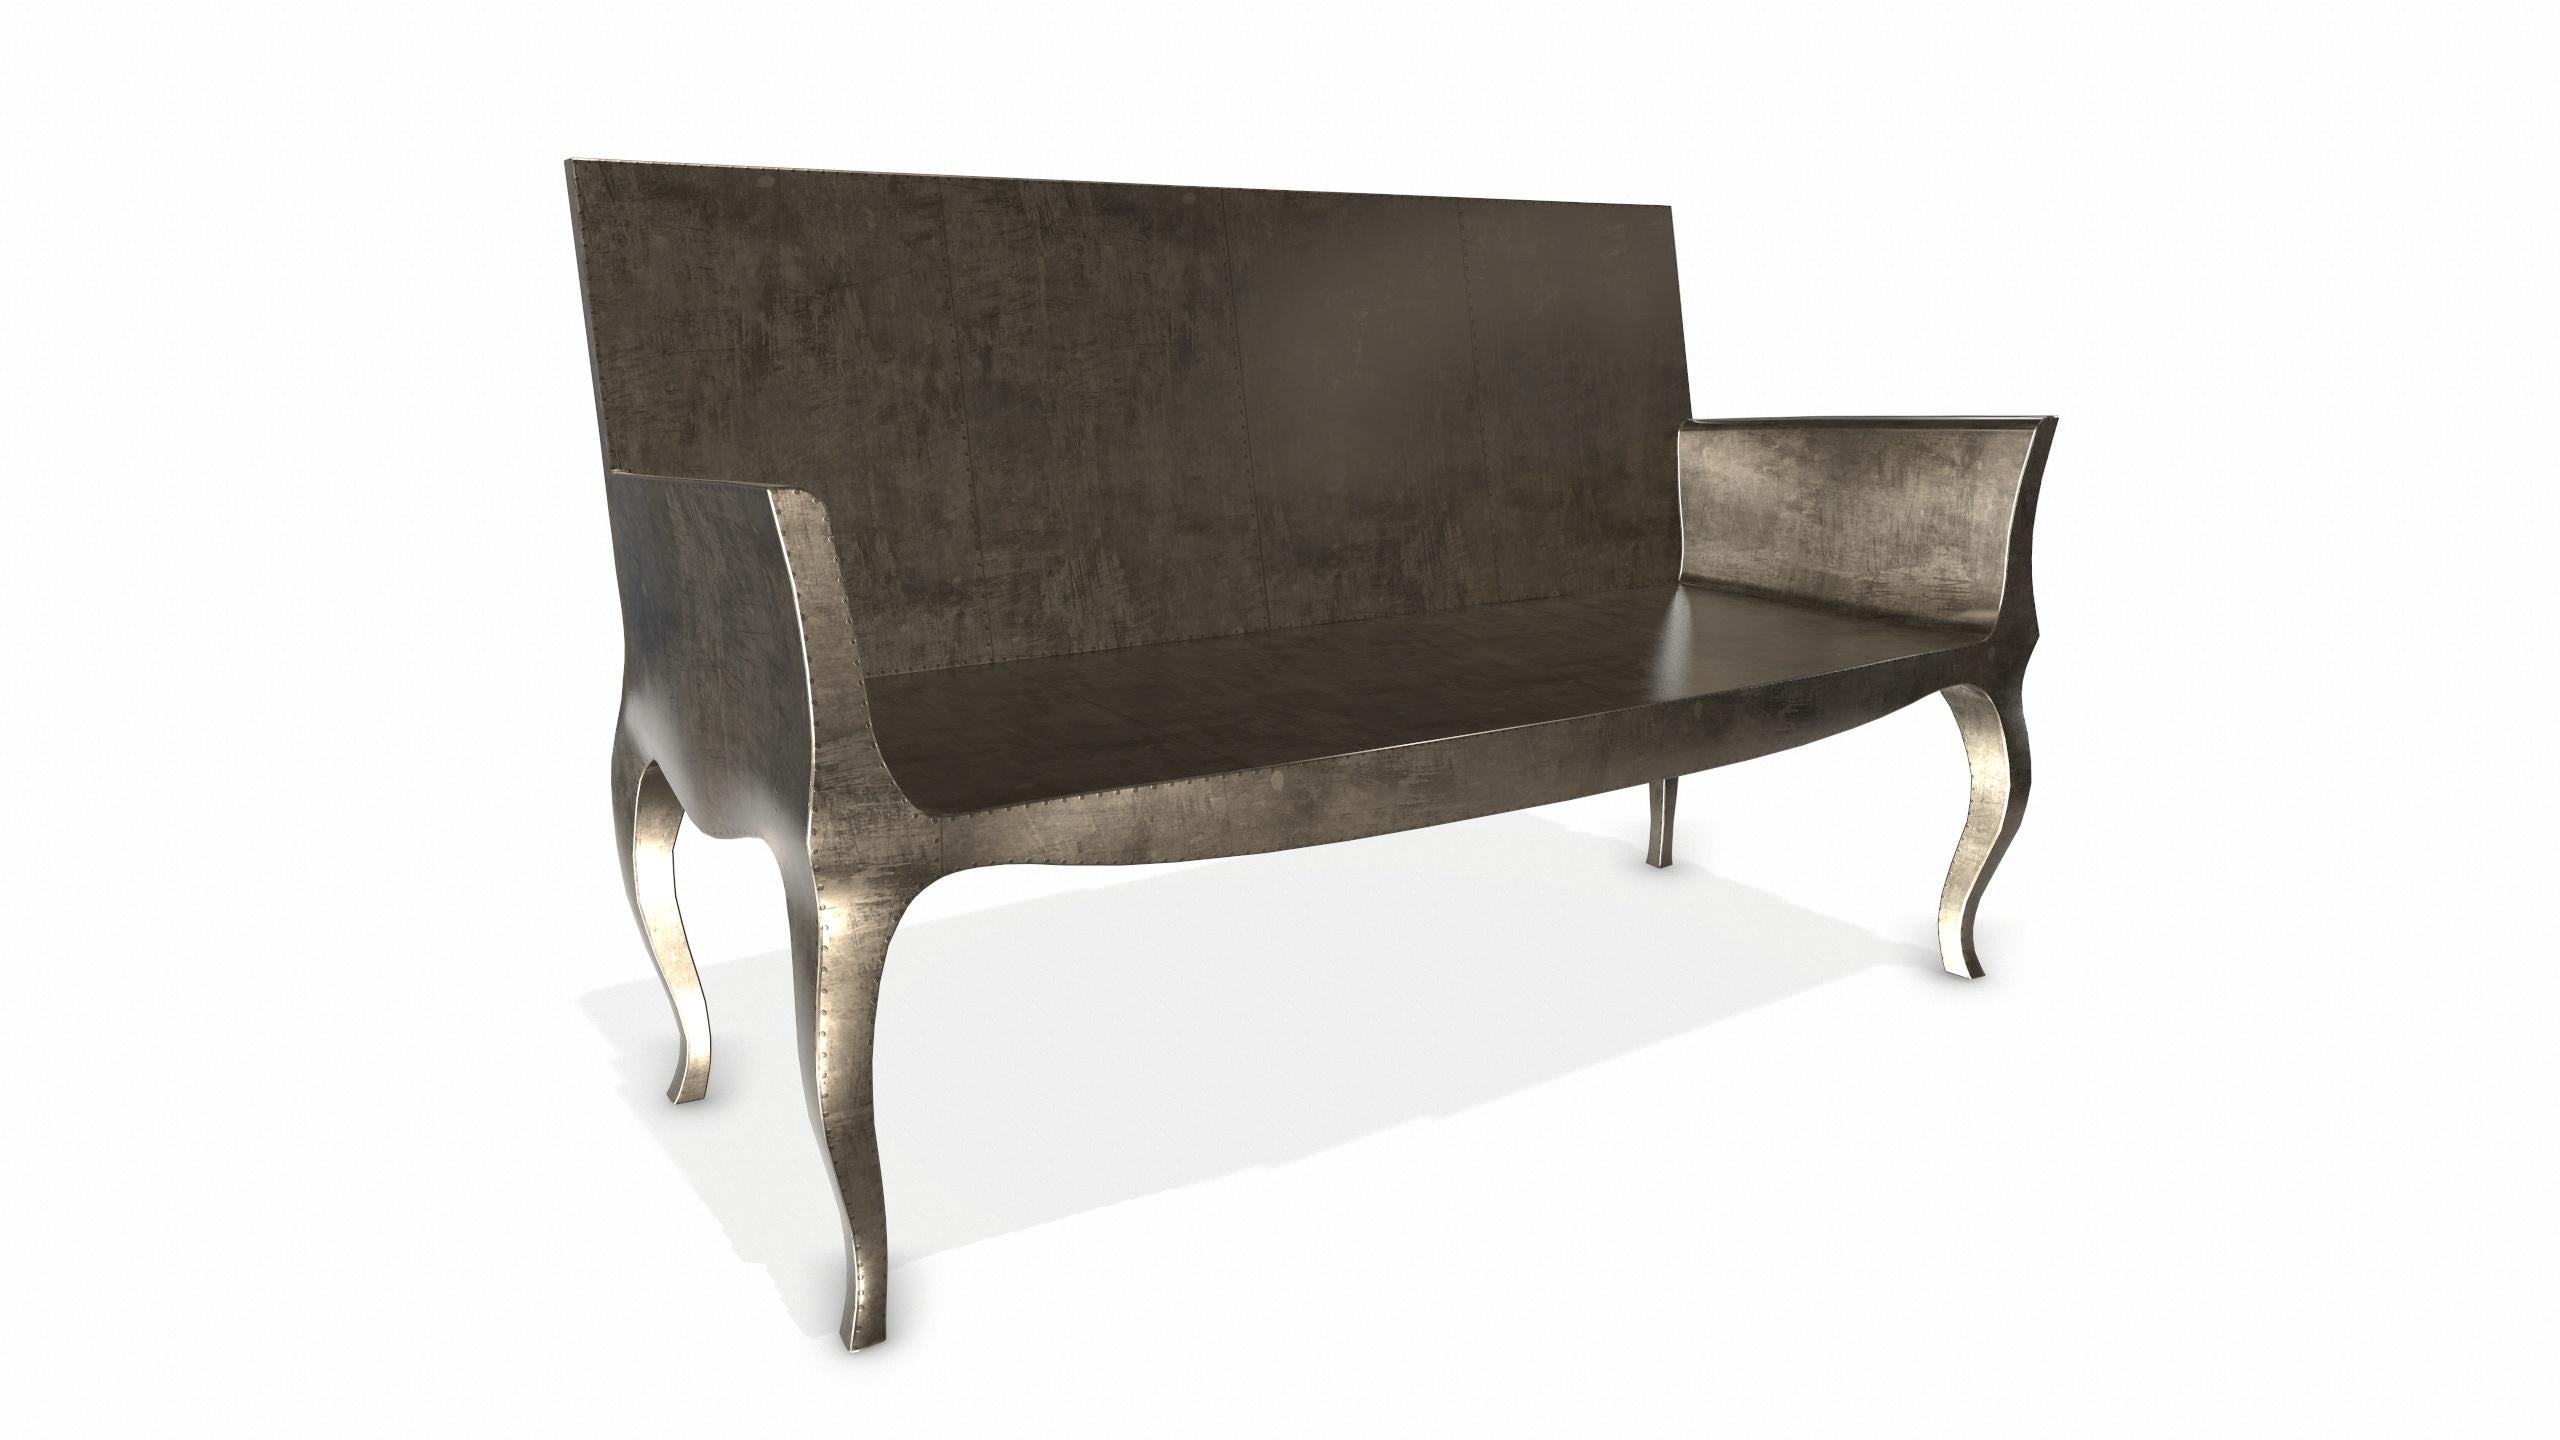 Contemporary Louise Settee Art Deco Loveseats in Smooth Antique Bronze by Paul Mathieu For Sale